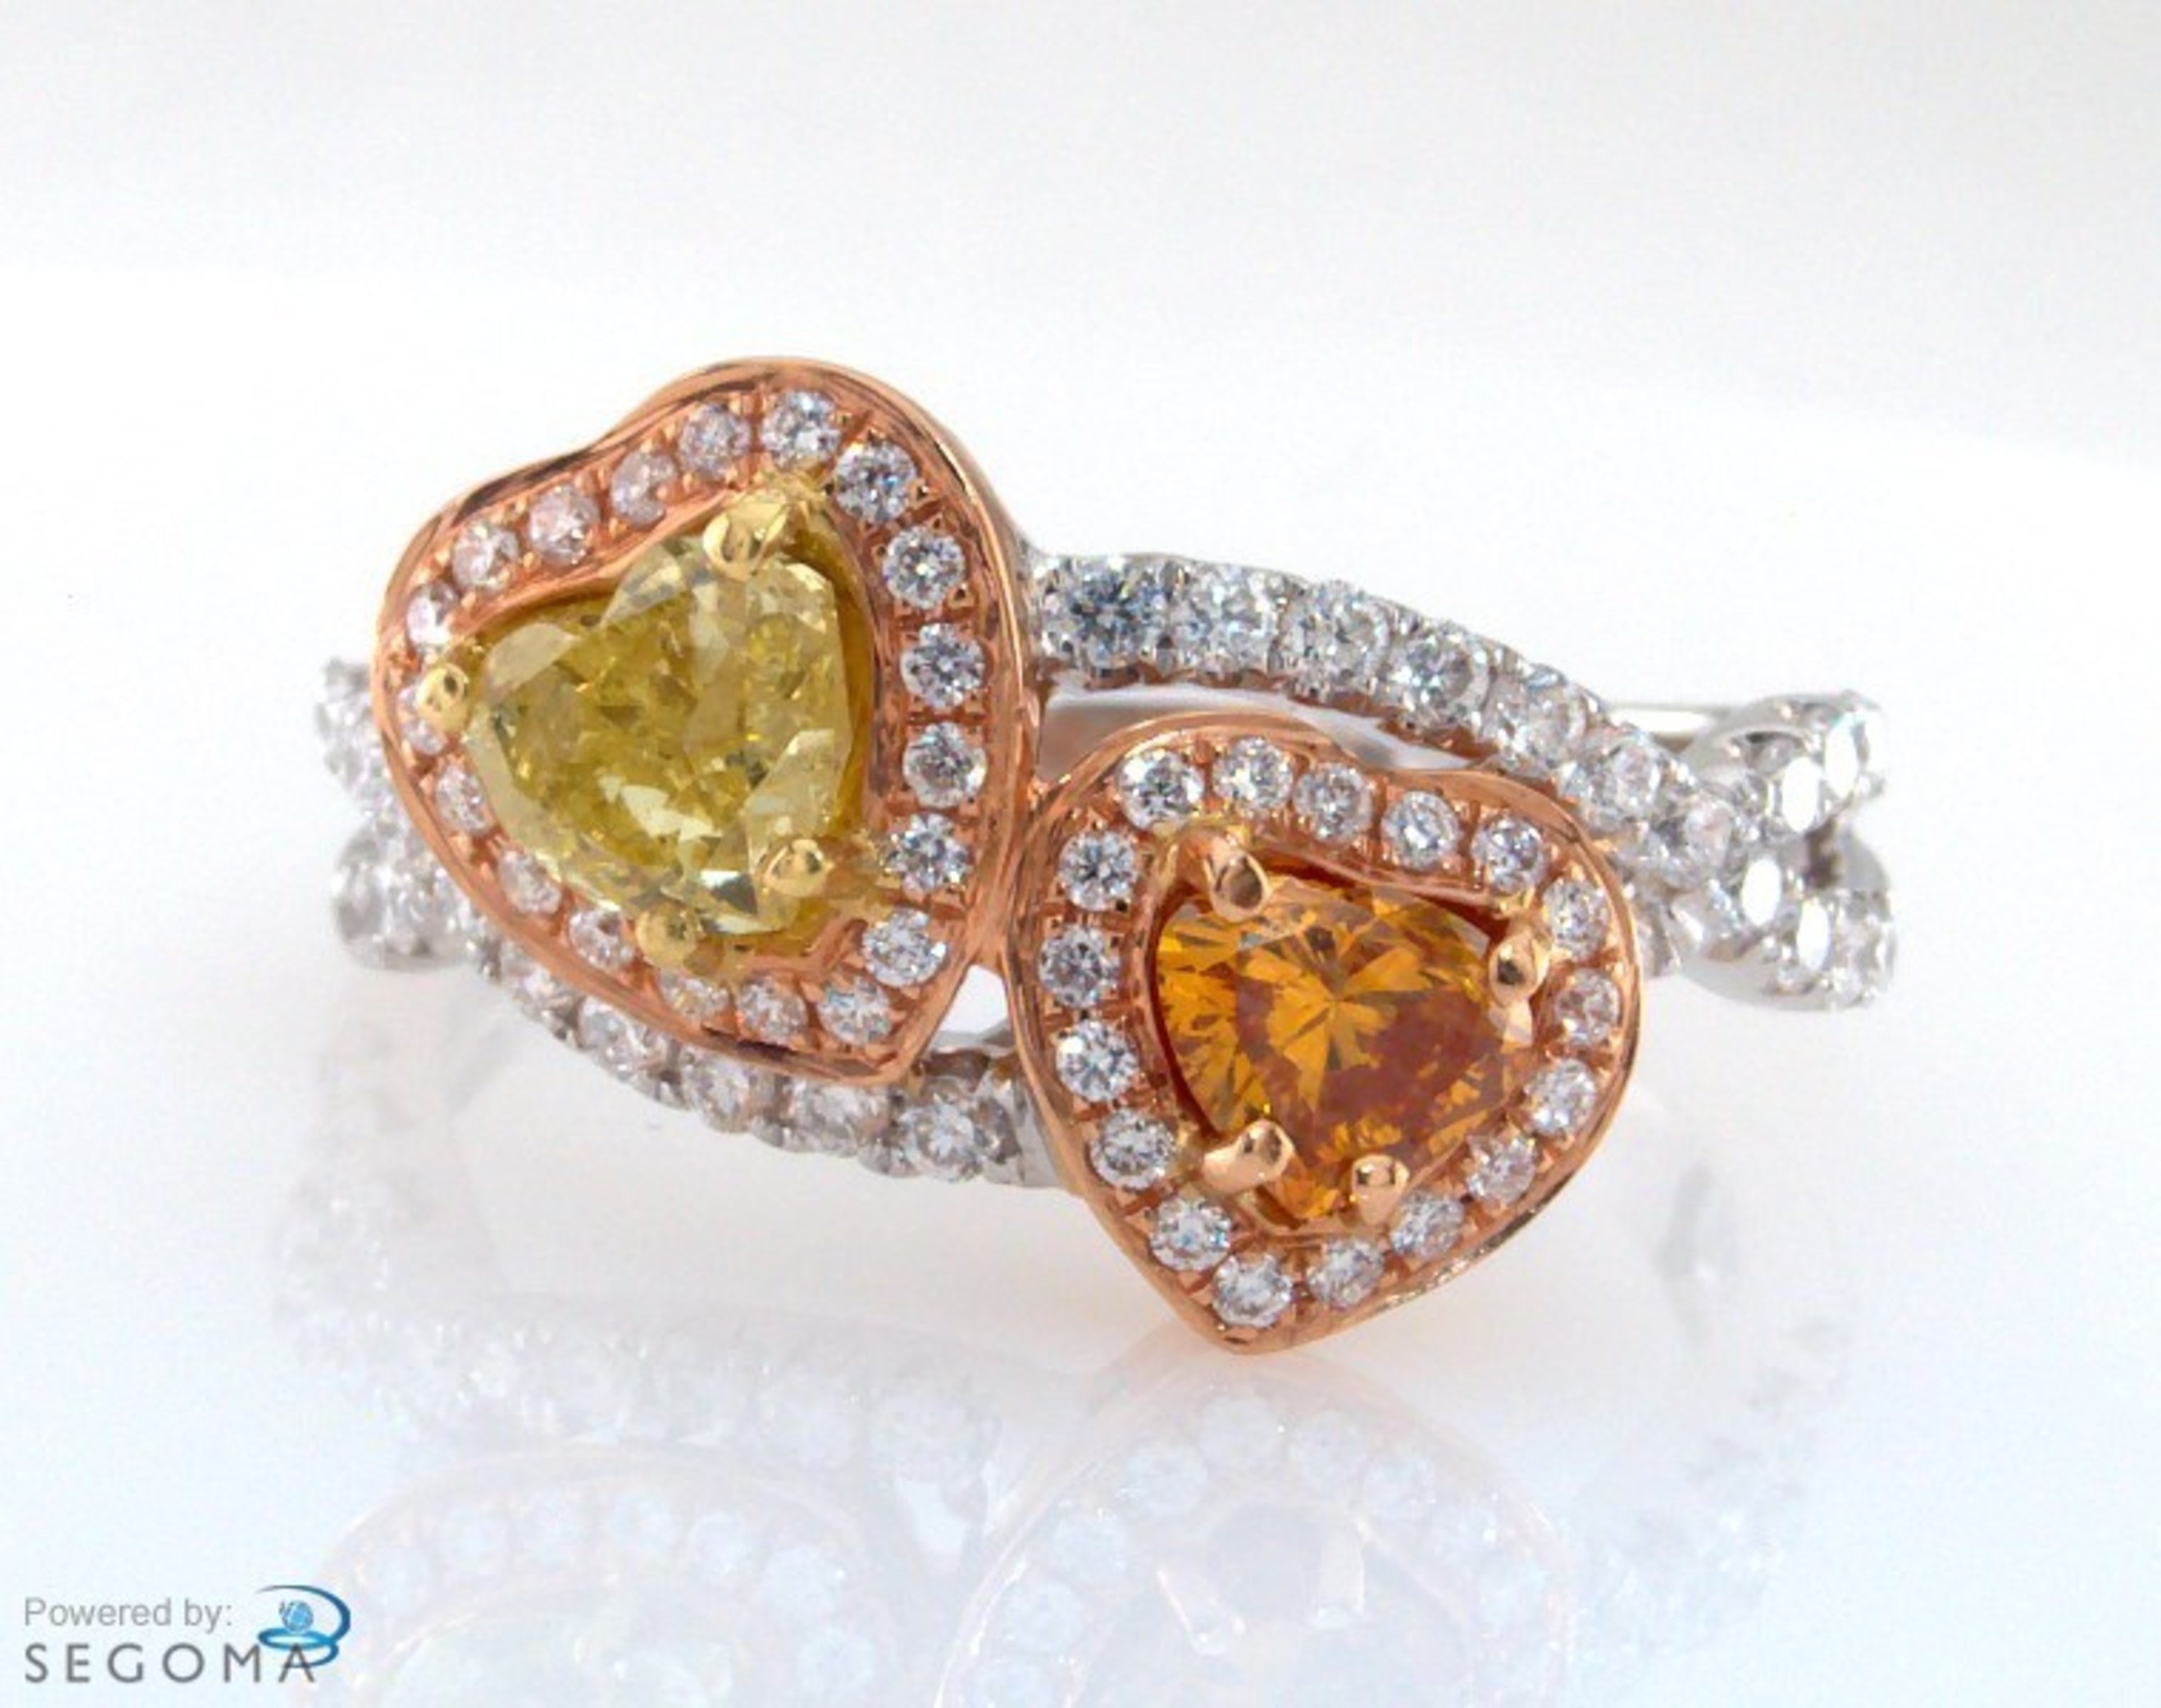 A perfect gift from the Sweet Valentine Israel Diamond Deals collection: Double Heart Shaped Ring by Denir Diamonds in 18K gold, with natural fancy yellow and deep yellow orange diamonds, surrounded by small natural white diamonds. Center stones are GIA certified.